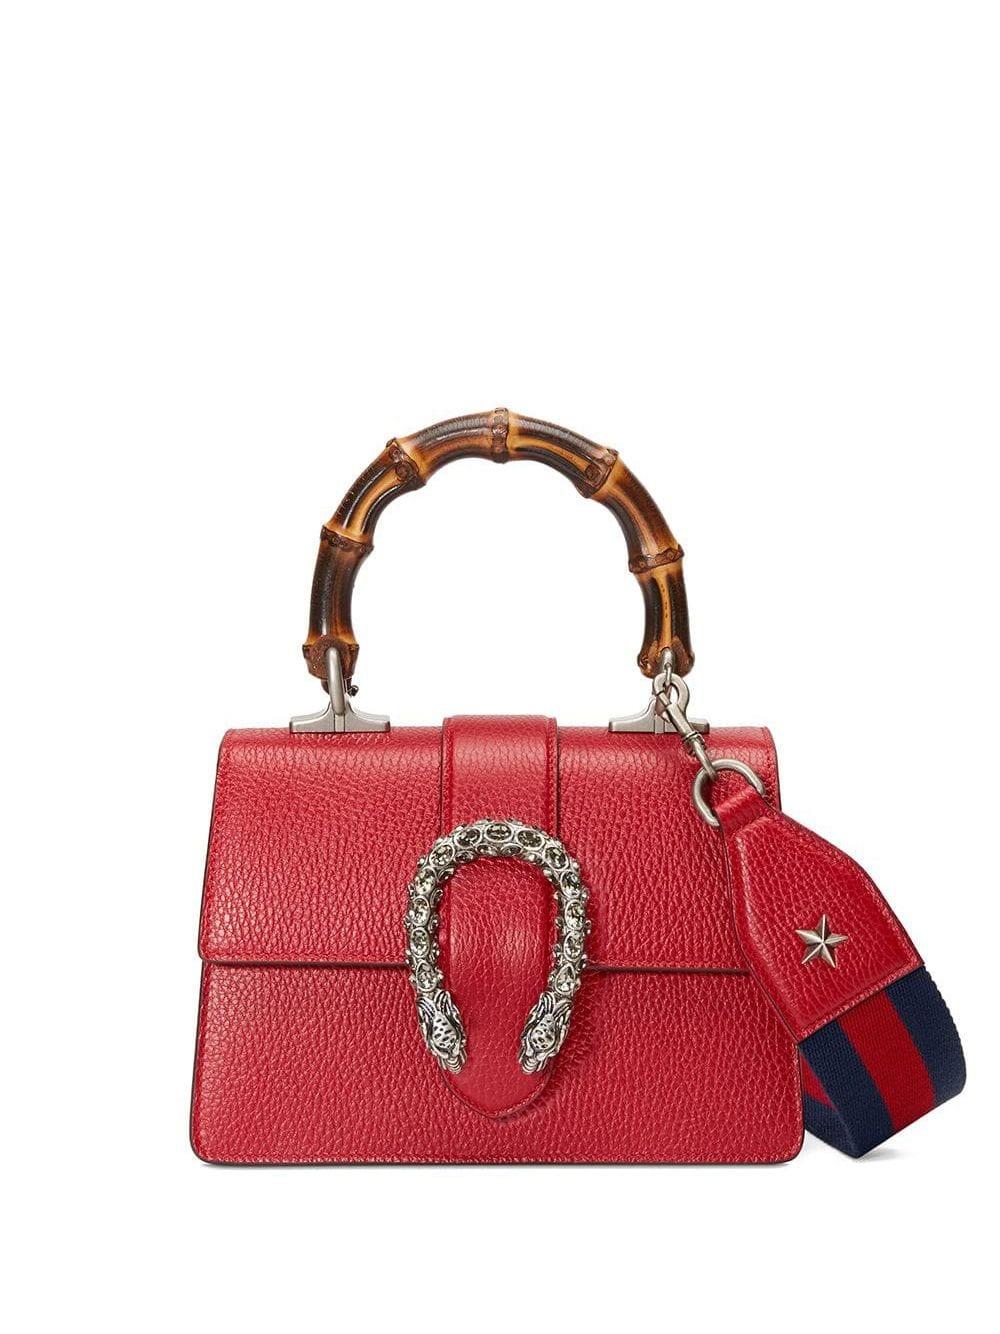 Gucci Leather Dionysus Mini Top Handle Bag in Red | Lyst